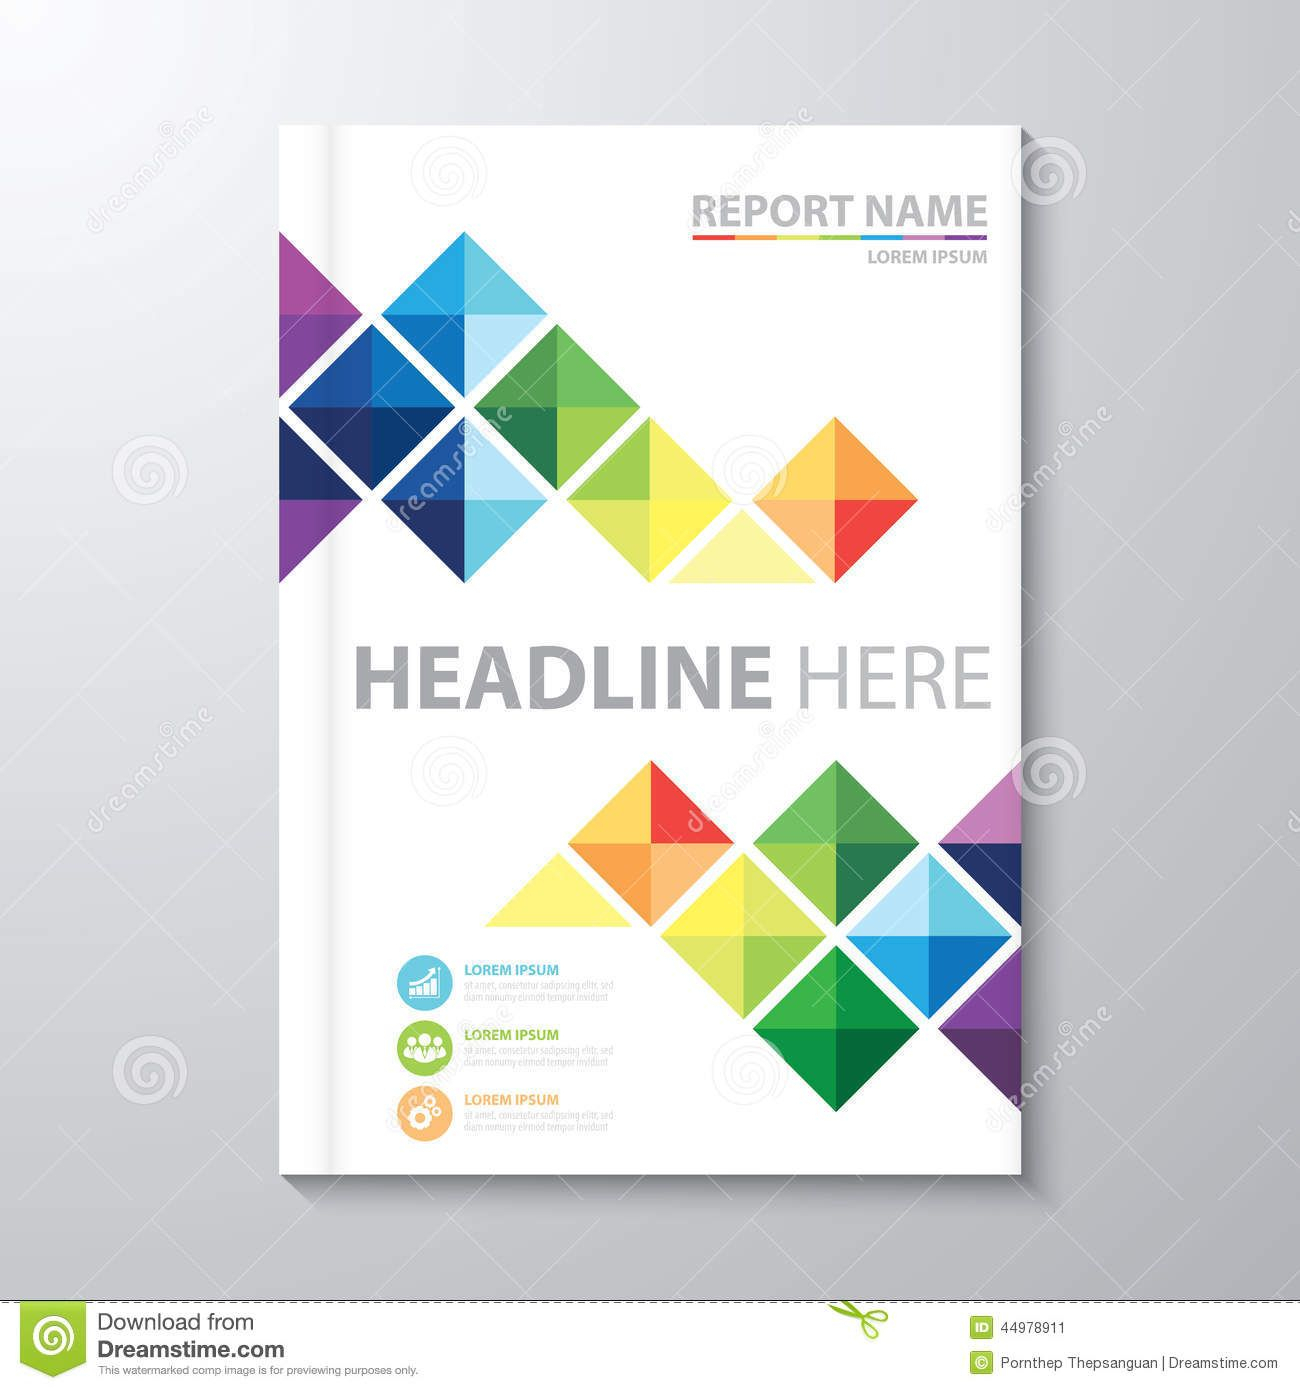 Report Cover E Template Templatelab Examples Microsoft Word Intended For Microsoft Word Cover Page Templates Download